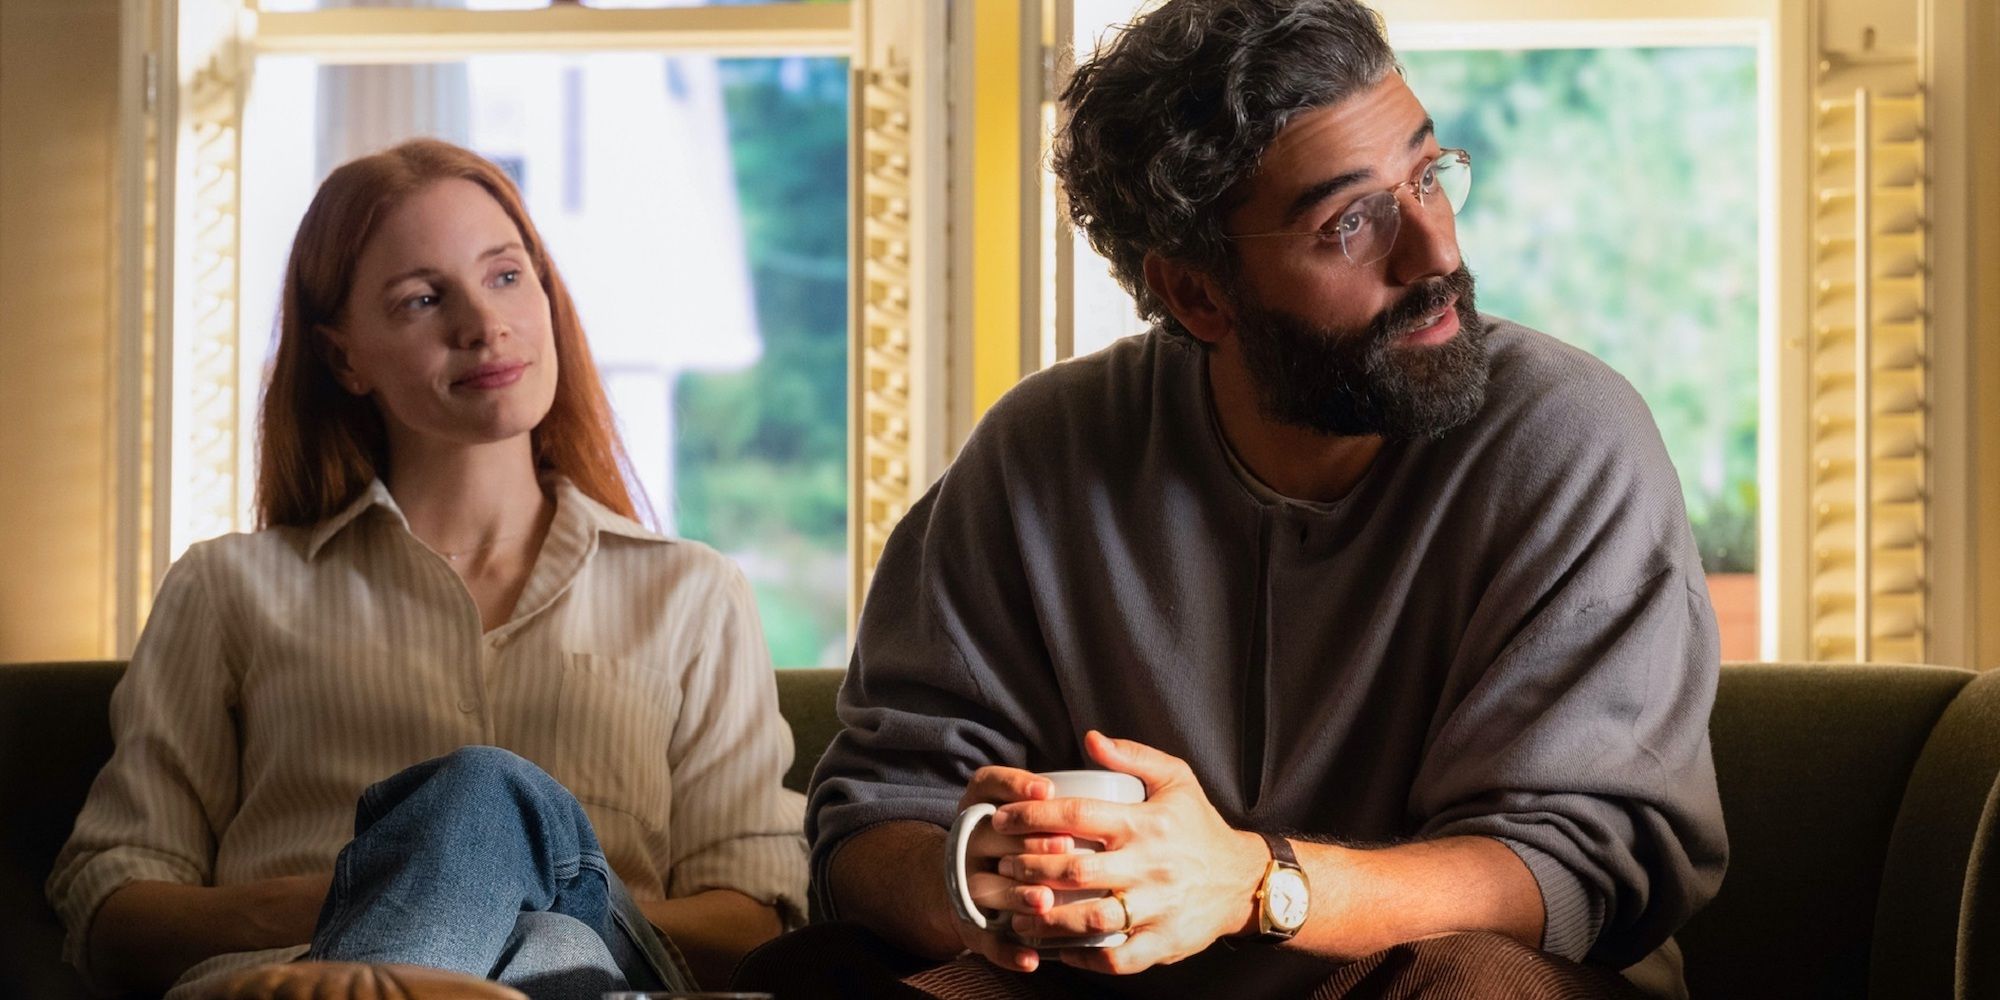 Jessica Chastain and Oscar Isaac in Scenes From a Marriage on HBO